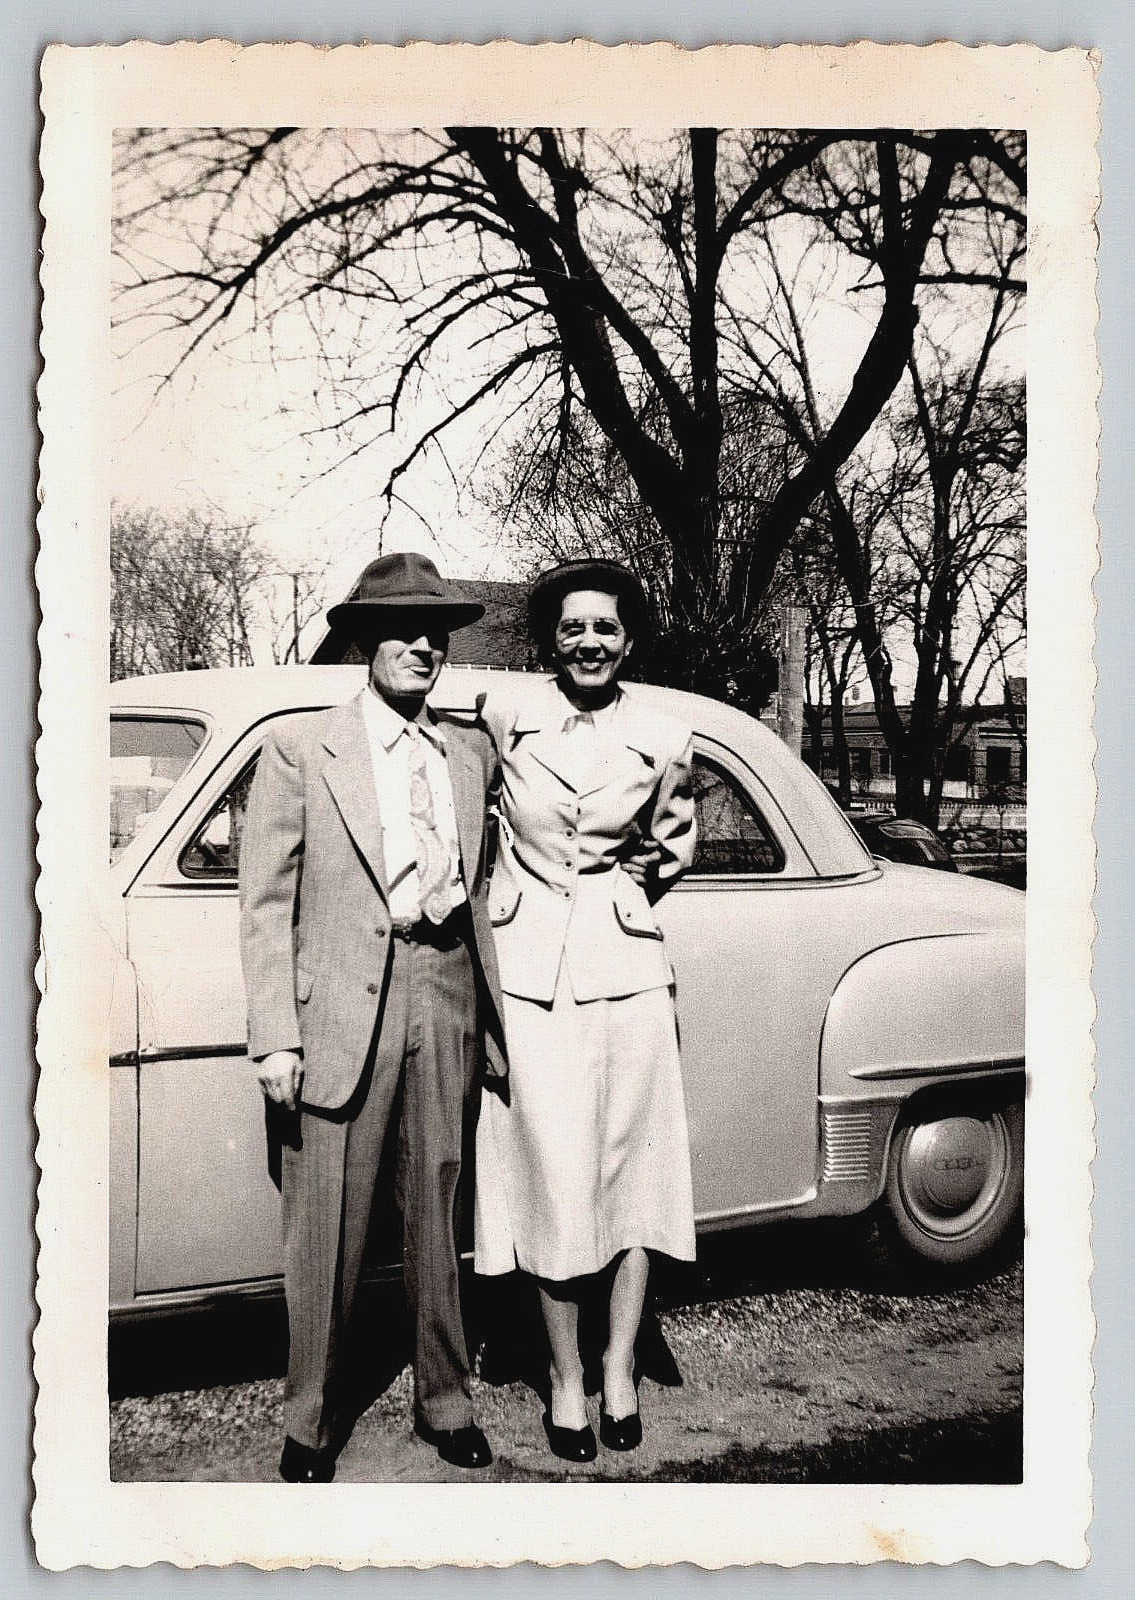 Evansville Indiana, Vintage Automobile Photograph, Man And Woman Dressed Up 1952